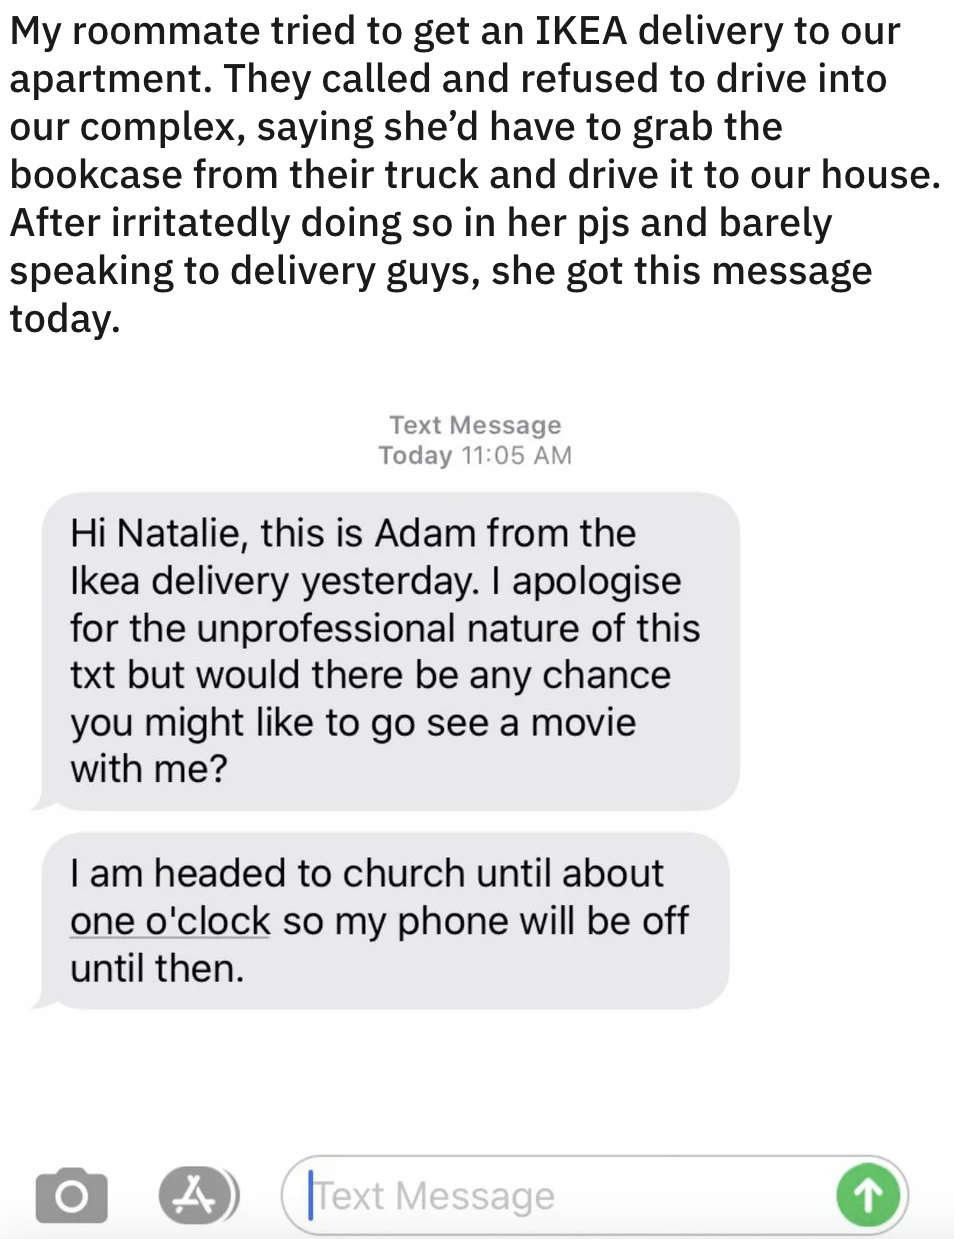 Text from a man asking a woman to go see a movie